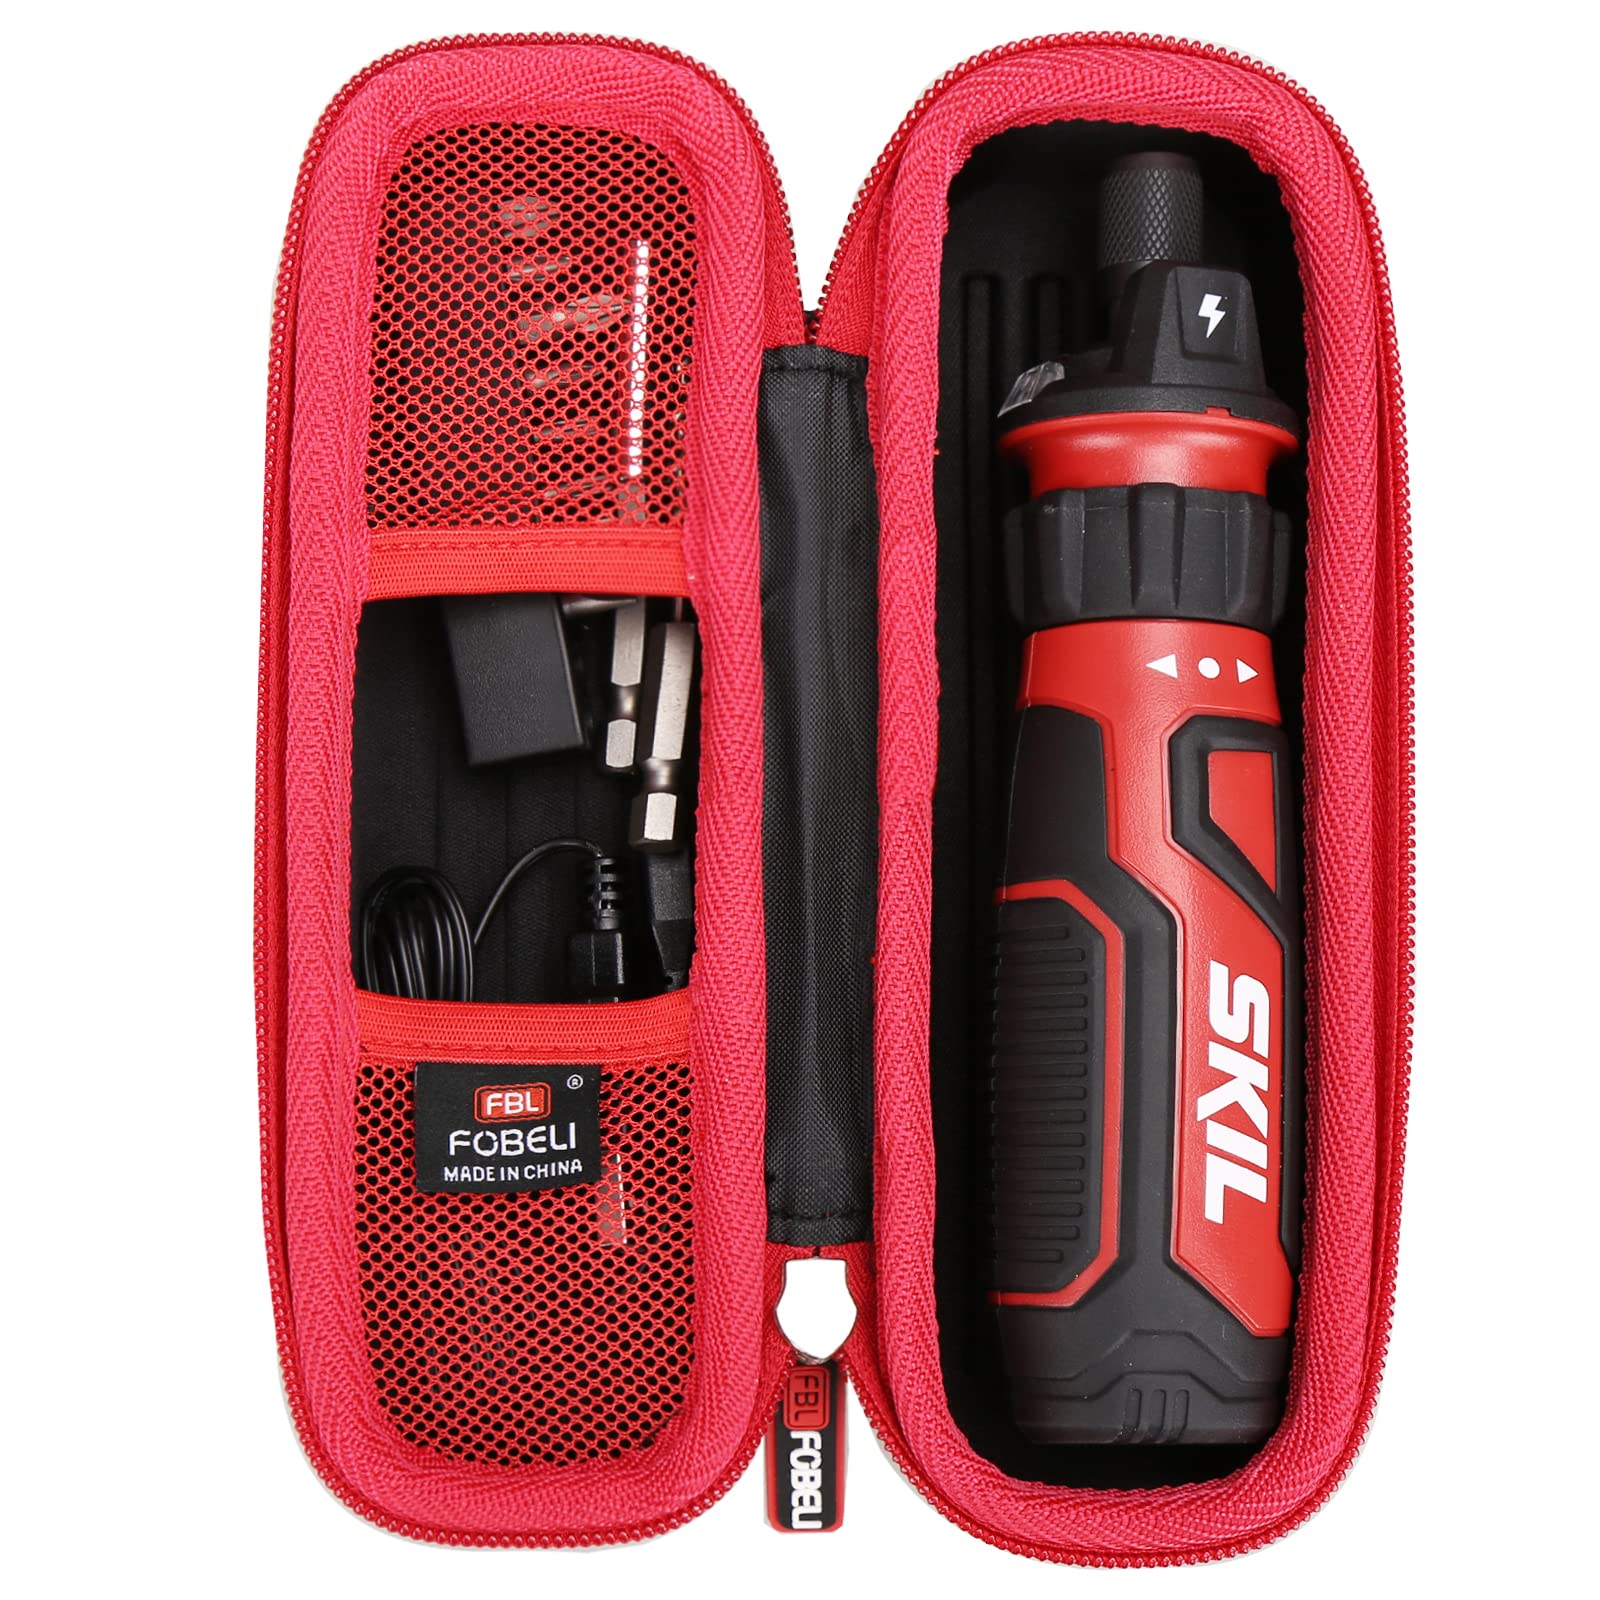 FBLFOBELI Hard Carrying Case Compatible with SKIL Rechargeable 4V Cordless Screwdriver SD561201, EVA Portable Storage Tools Bag (Case Only)